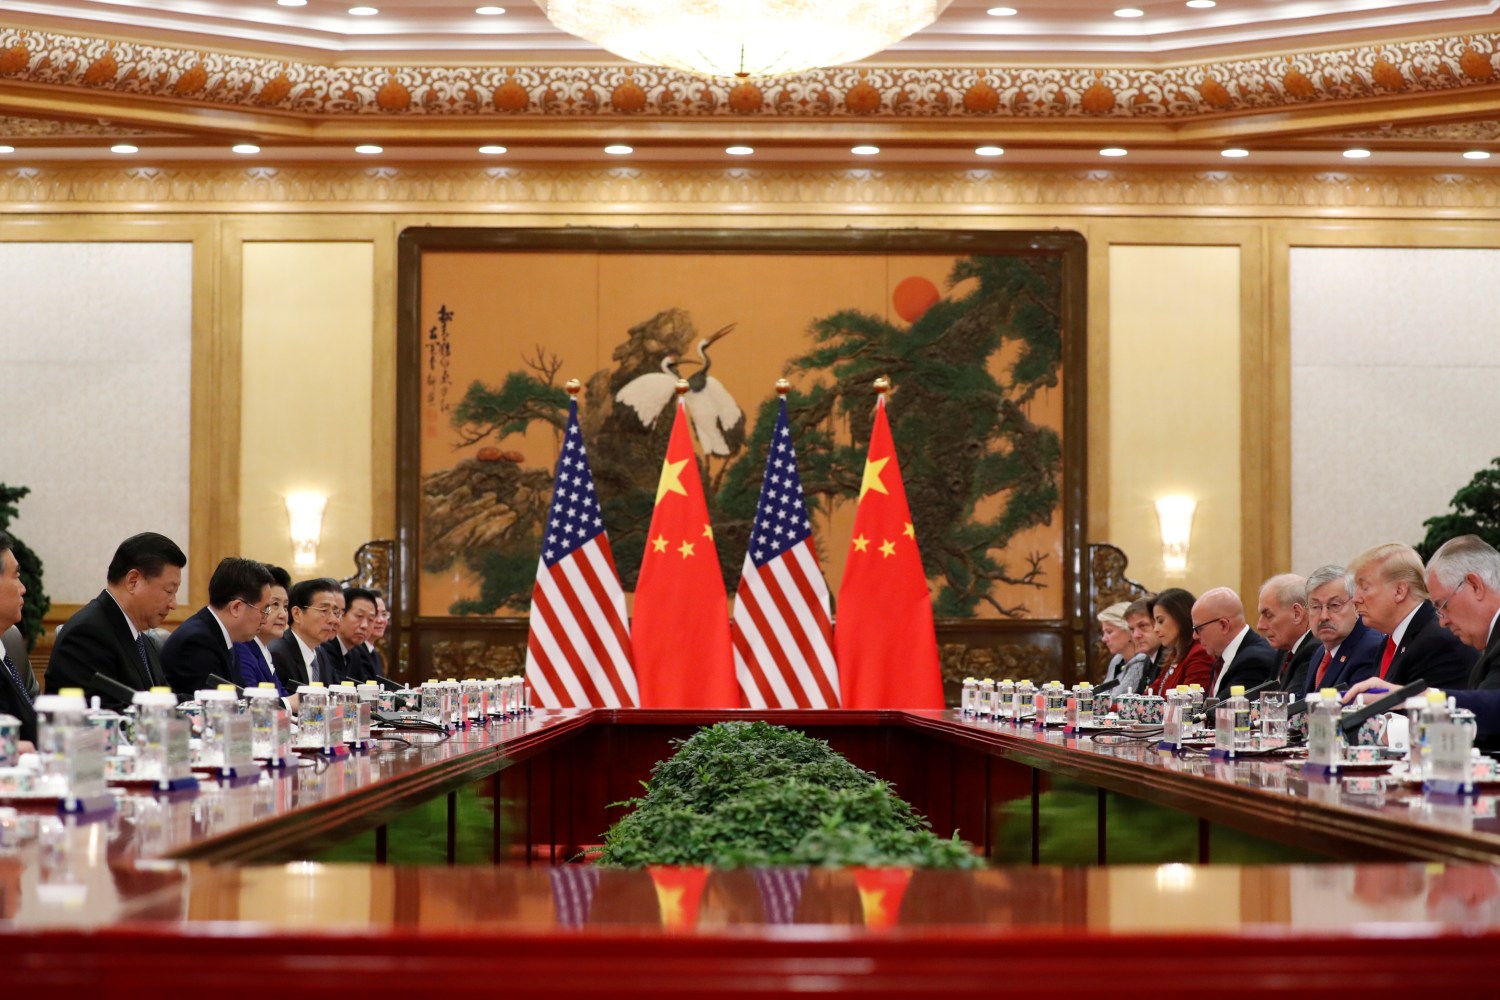 U.S. President Donald Trump and China's President Xi Jinping hold bilateral meetings at the Great Hall of the People in Beijing, China, November 9, 2017.